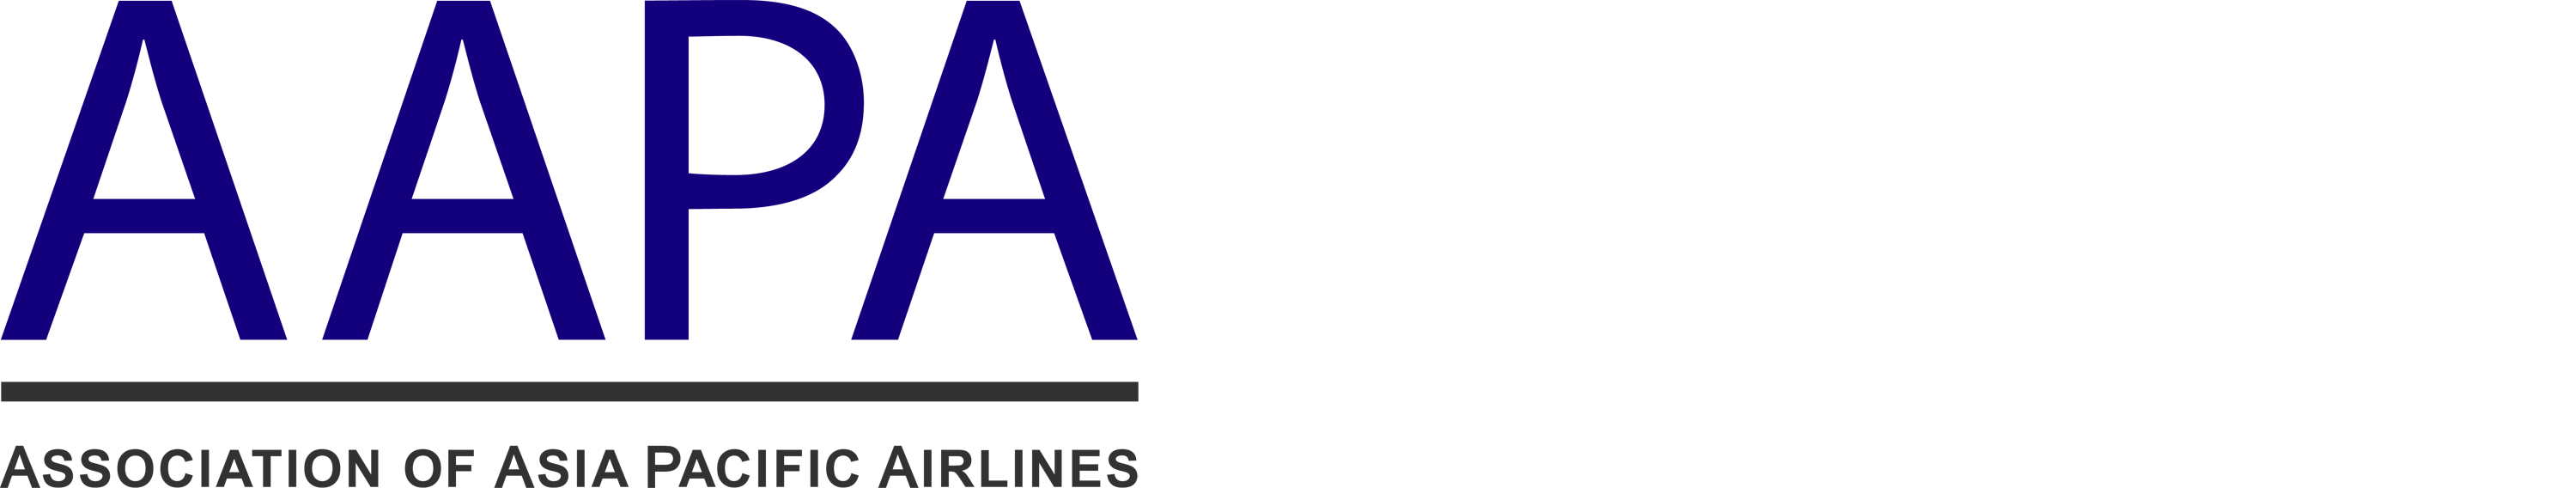 Asia Airlines Logo - AAPA – Association of Asia Pacific Airlines